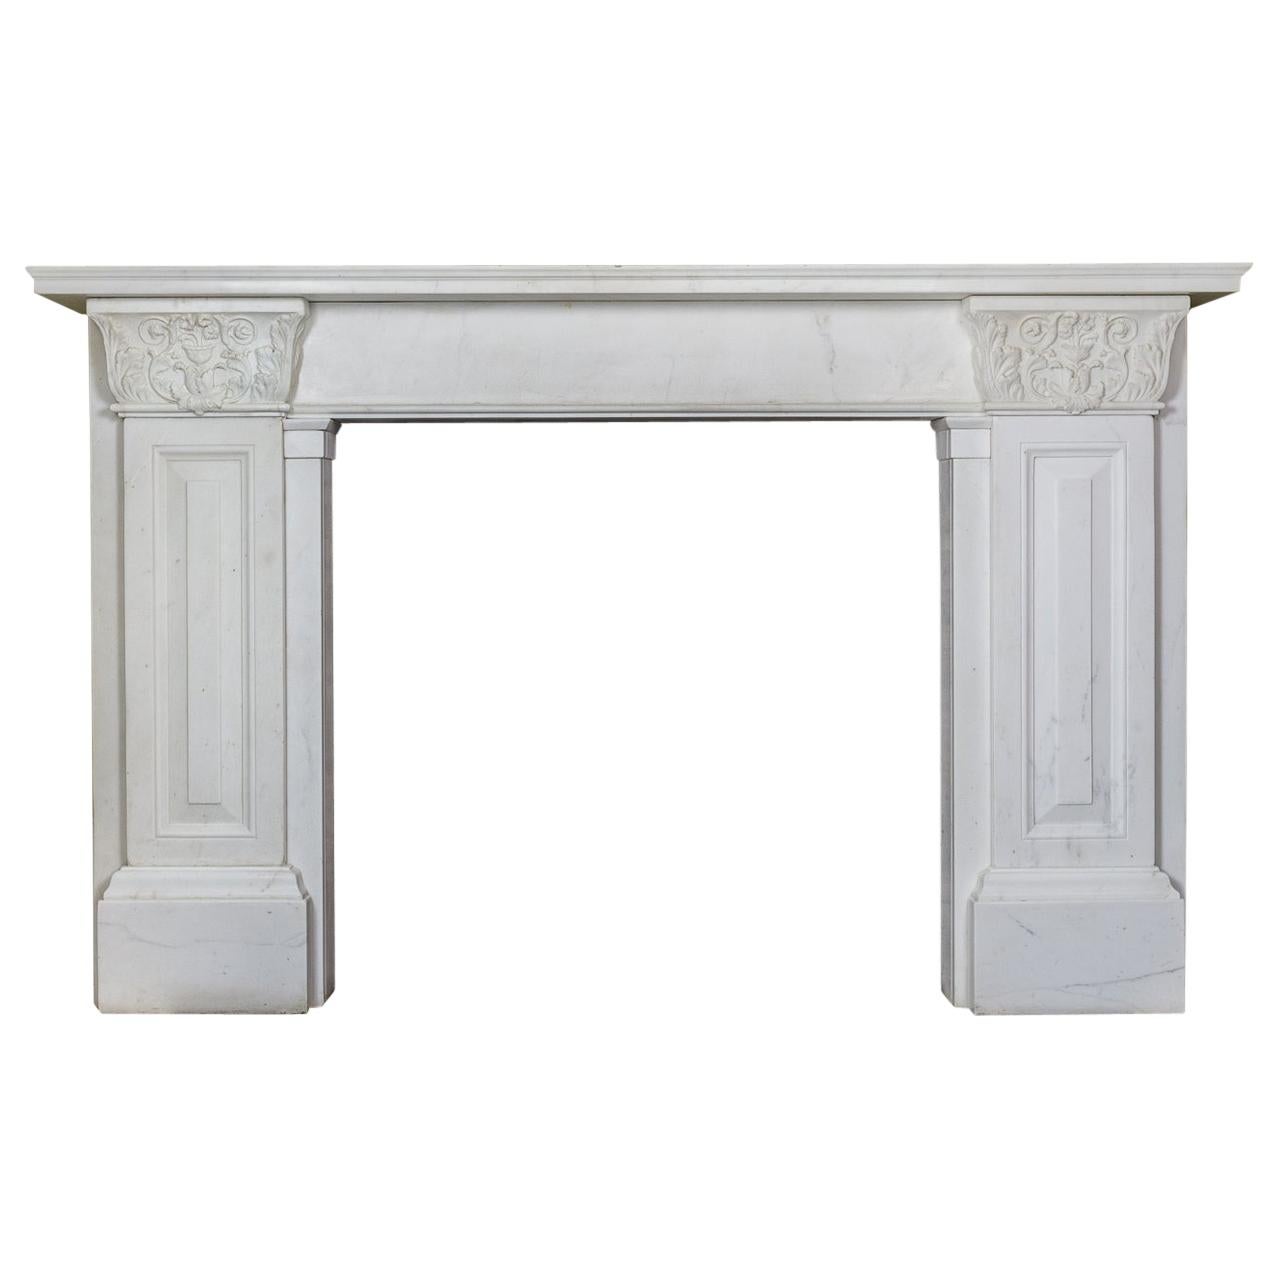 The Theatre Royal Covent Garden Chimneypiece - Regency Marble Fireplace